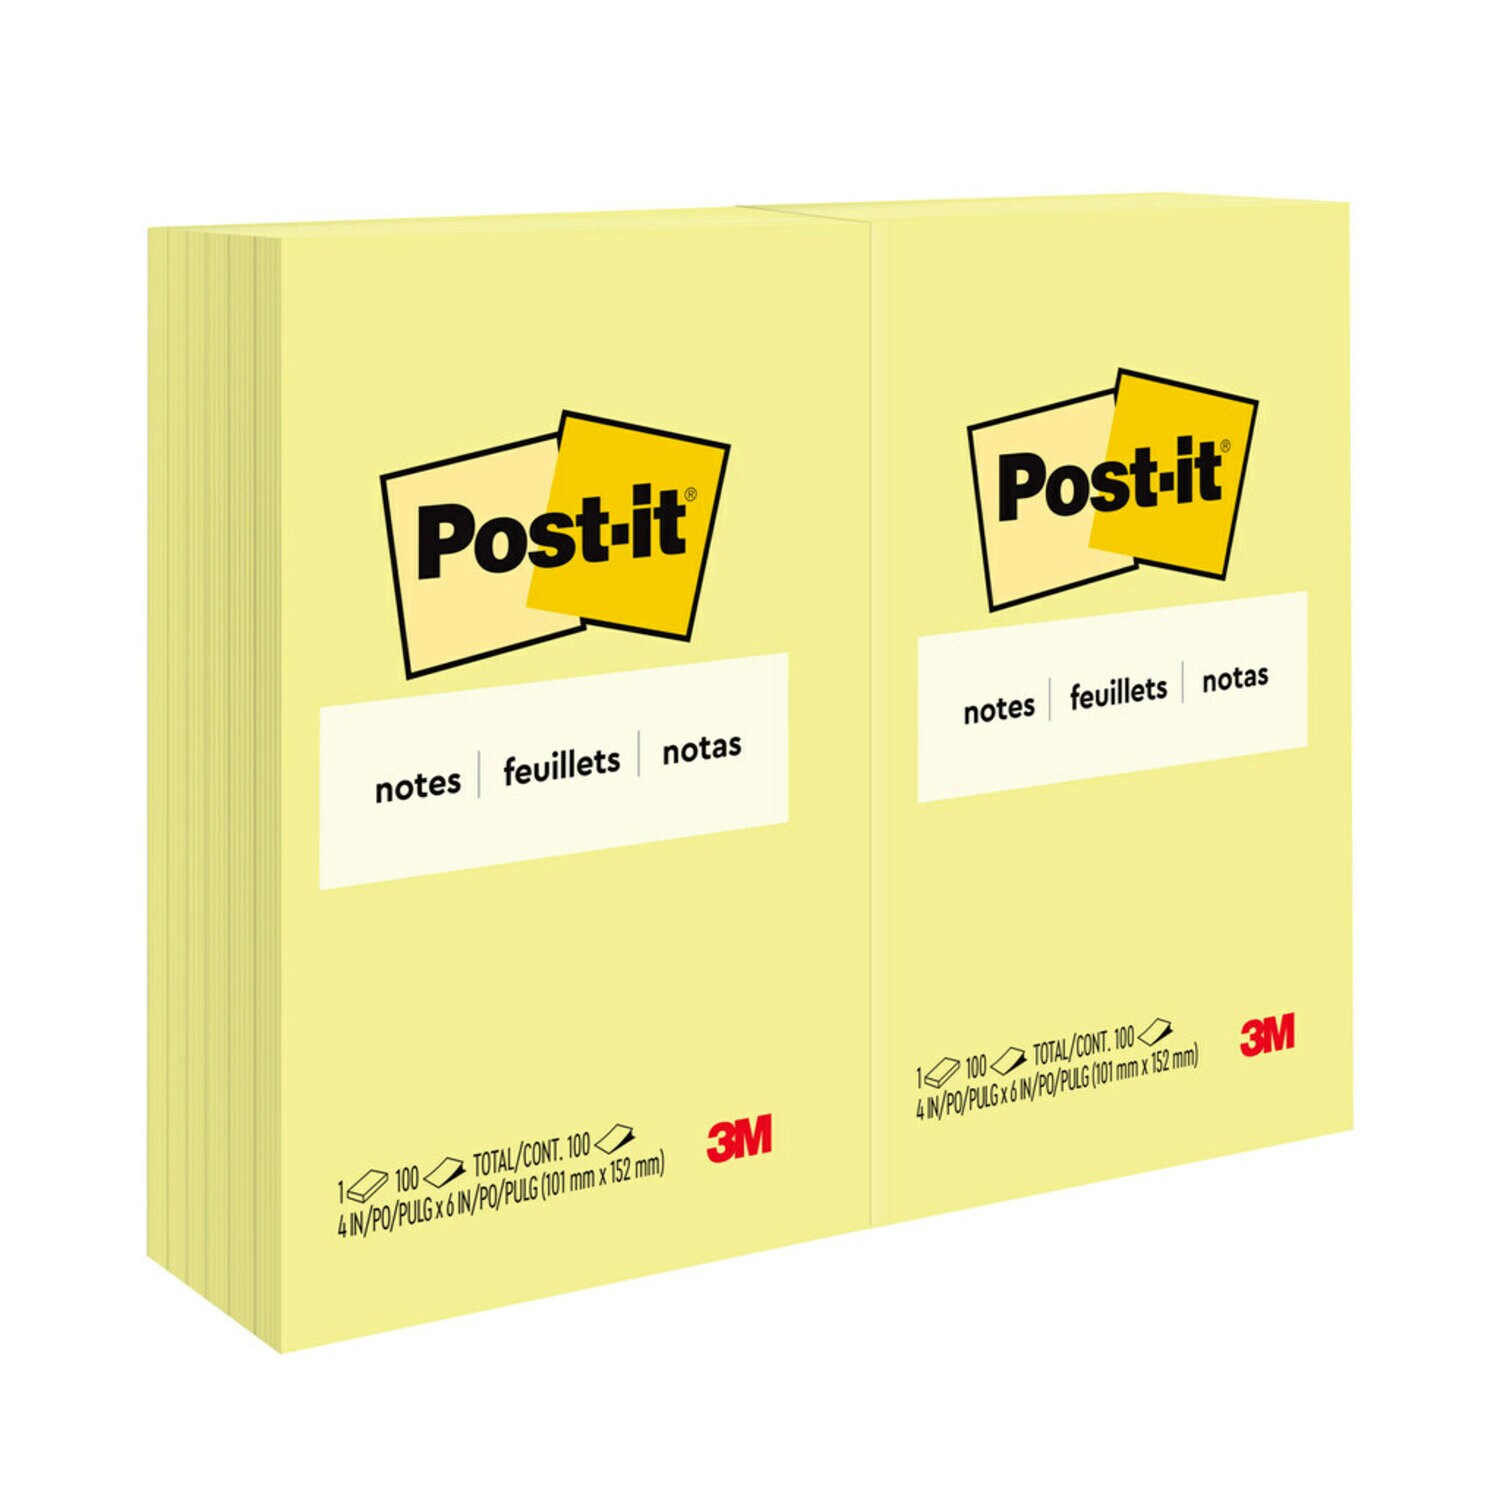 7000050061 - Post-it Products Notes 659, 4 in x 6 in (101 mm x 152 mm)